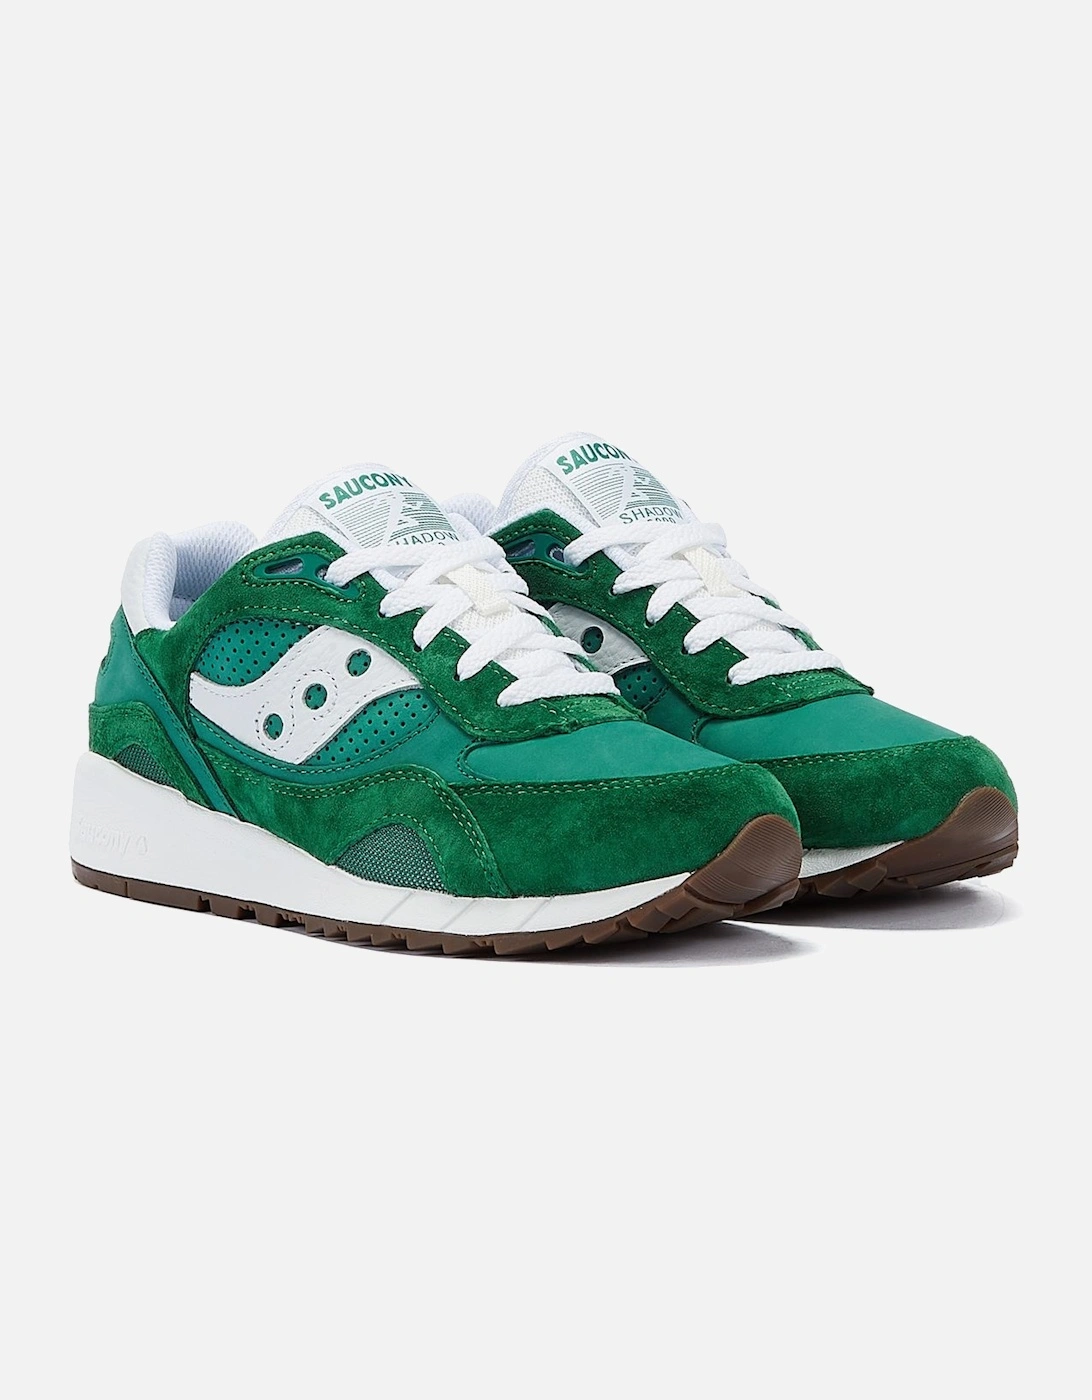 Shadow 6000 Green/White Trainers, 9 of 8